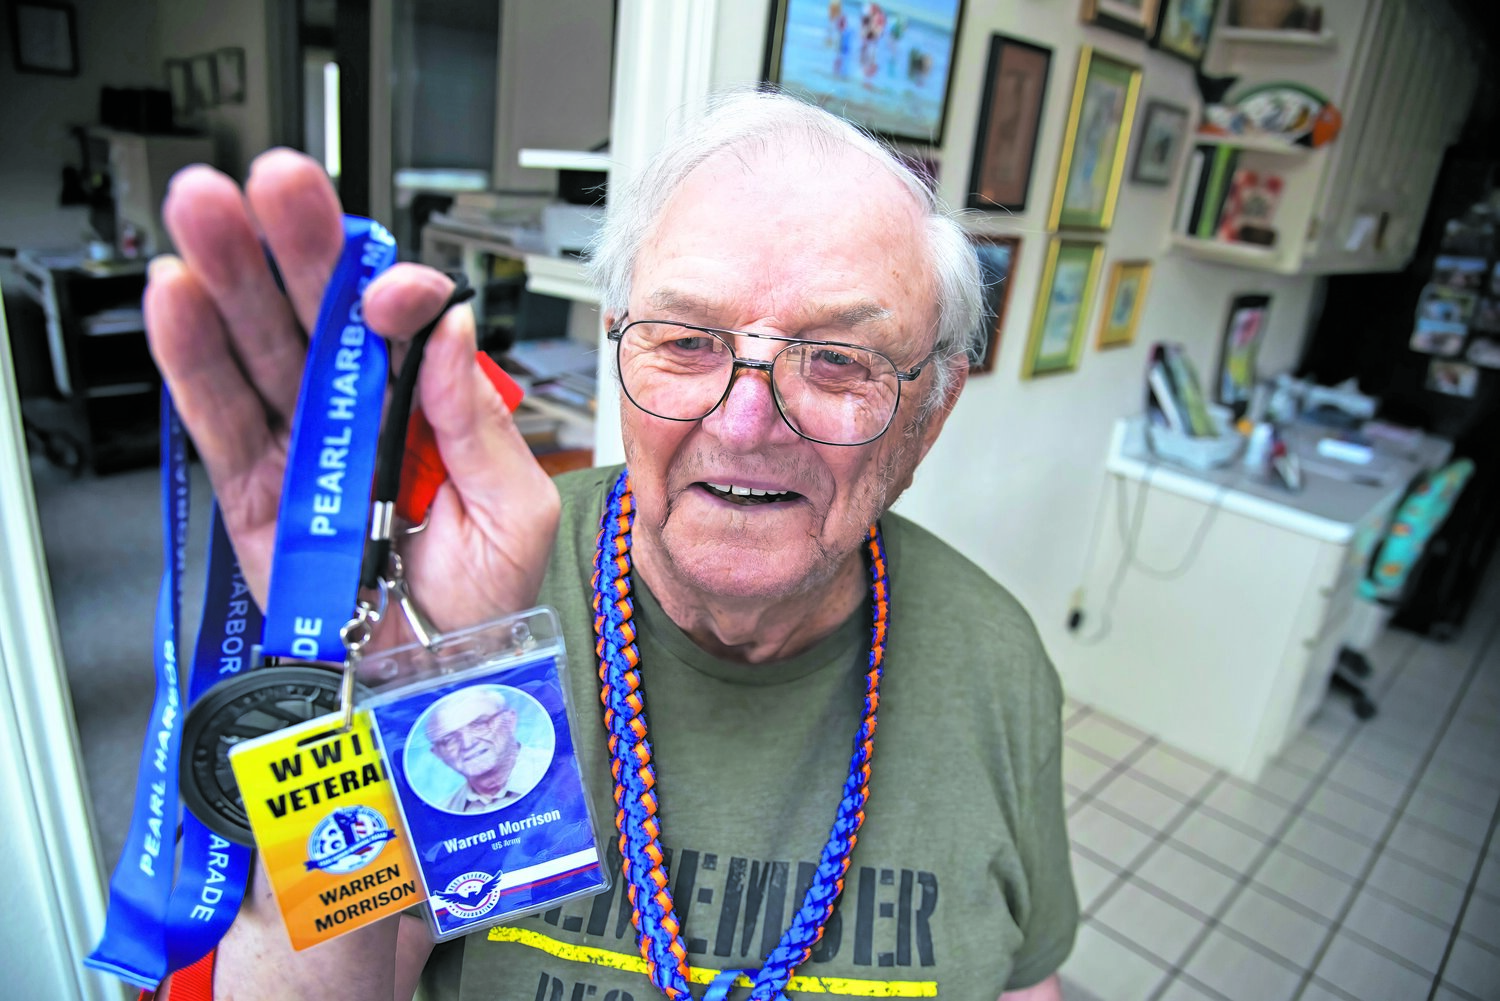 HAPPY CAMPER: Army veteran Warren Morrison was tickled pink to get an invitation to Honolulu, Hawaii, to be a part of events commemorating 80 years since the attack on Pearl Harbor. 